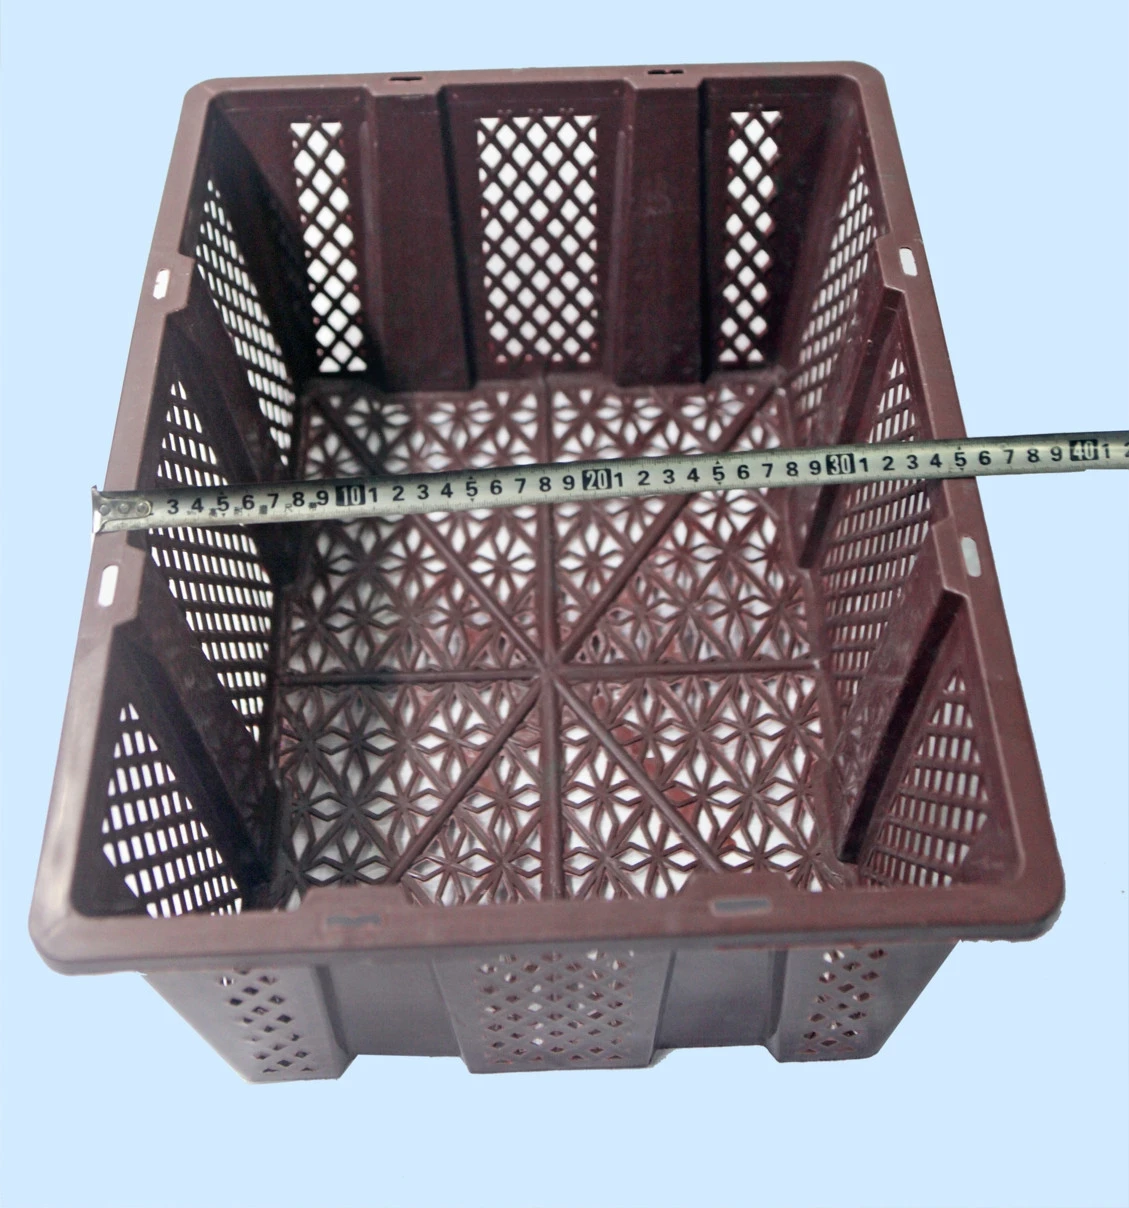 Vietnam wholesale plastic crate storage transportation customized style , crate Chili, crates for agricultural products